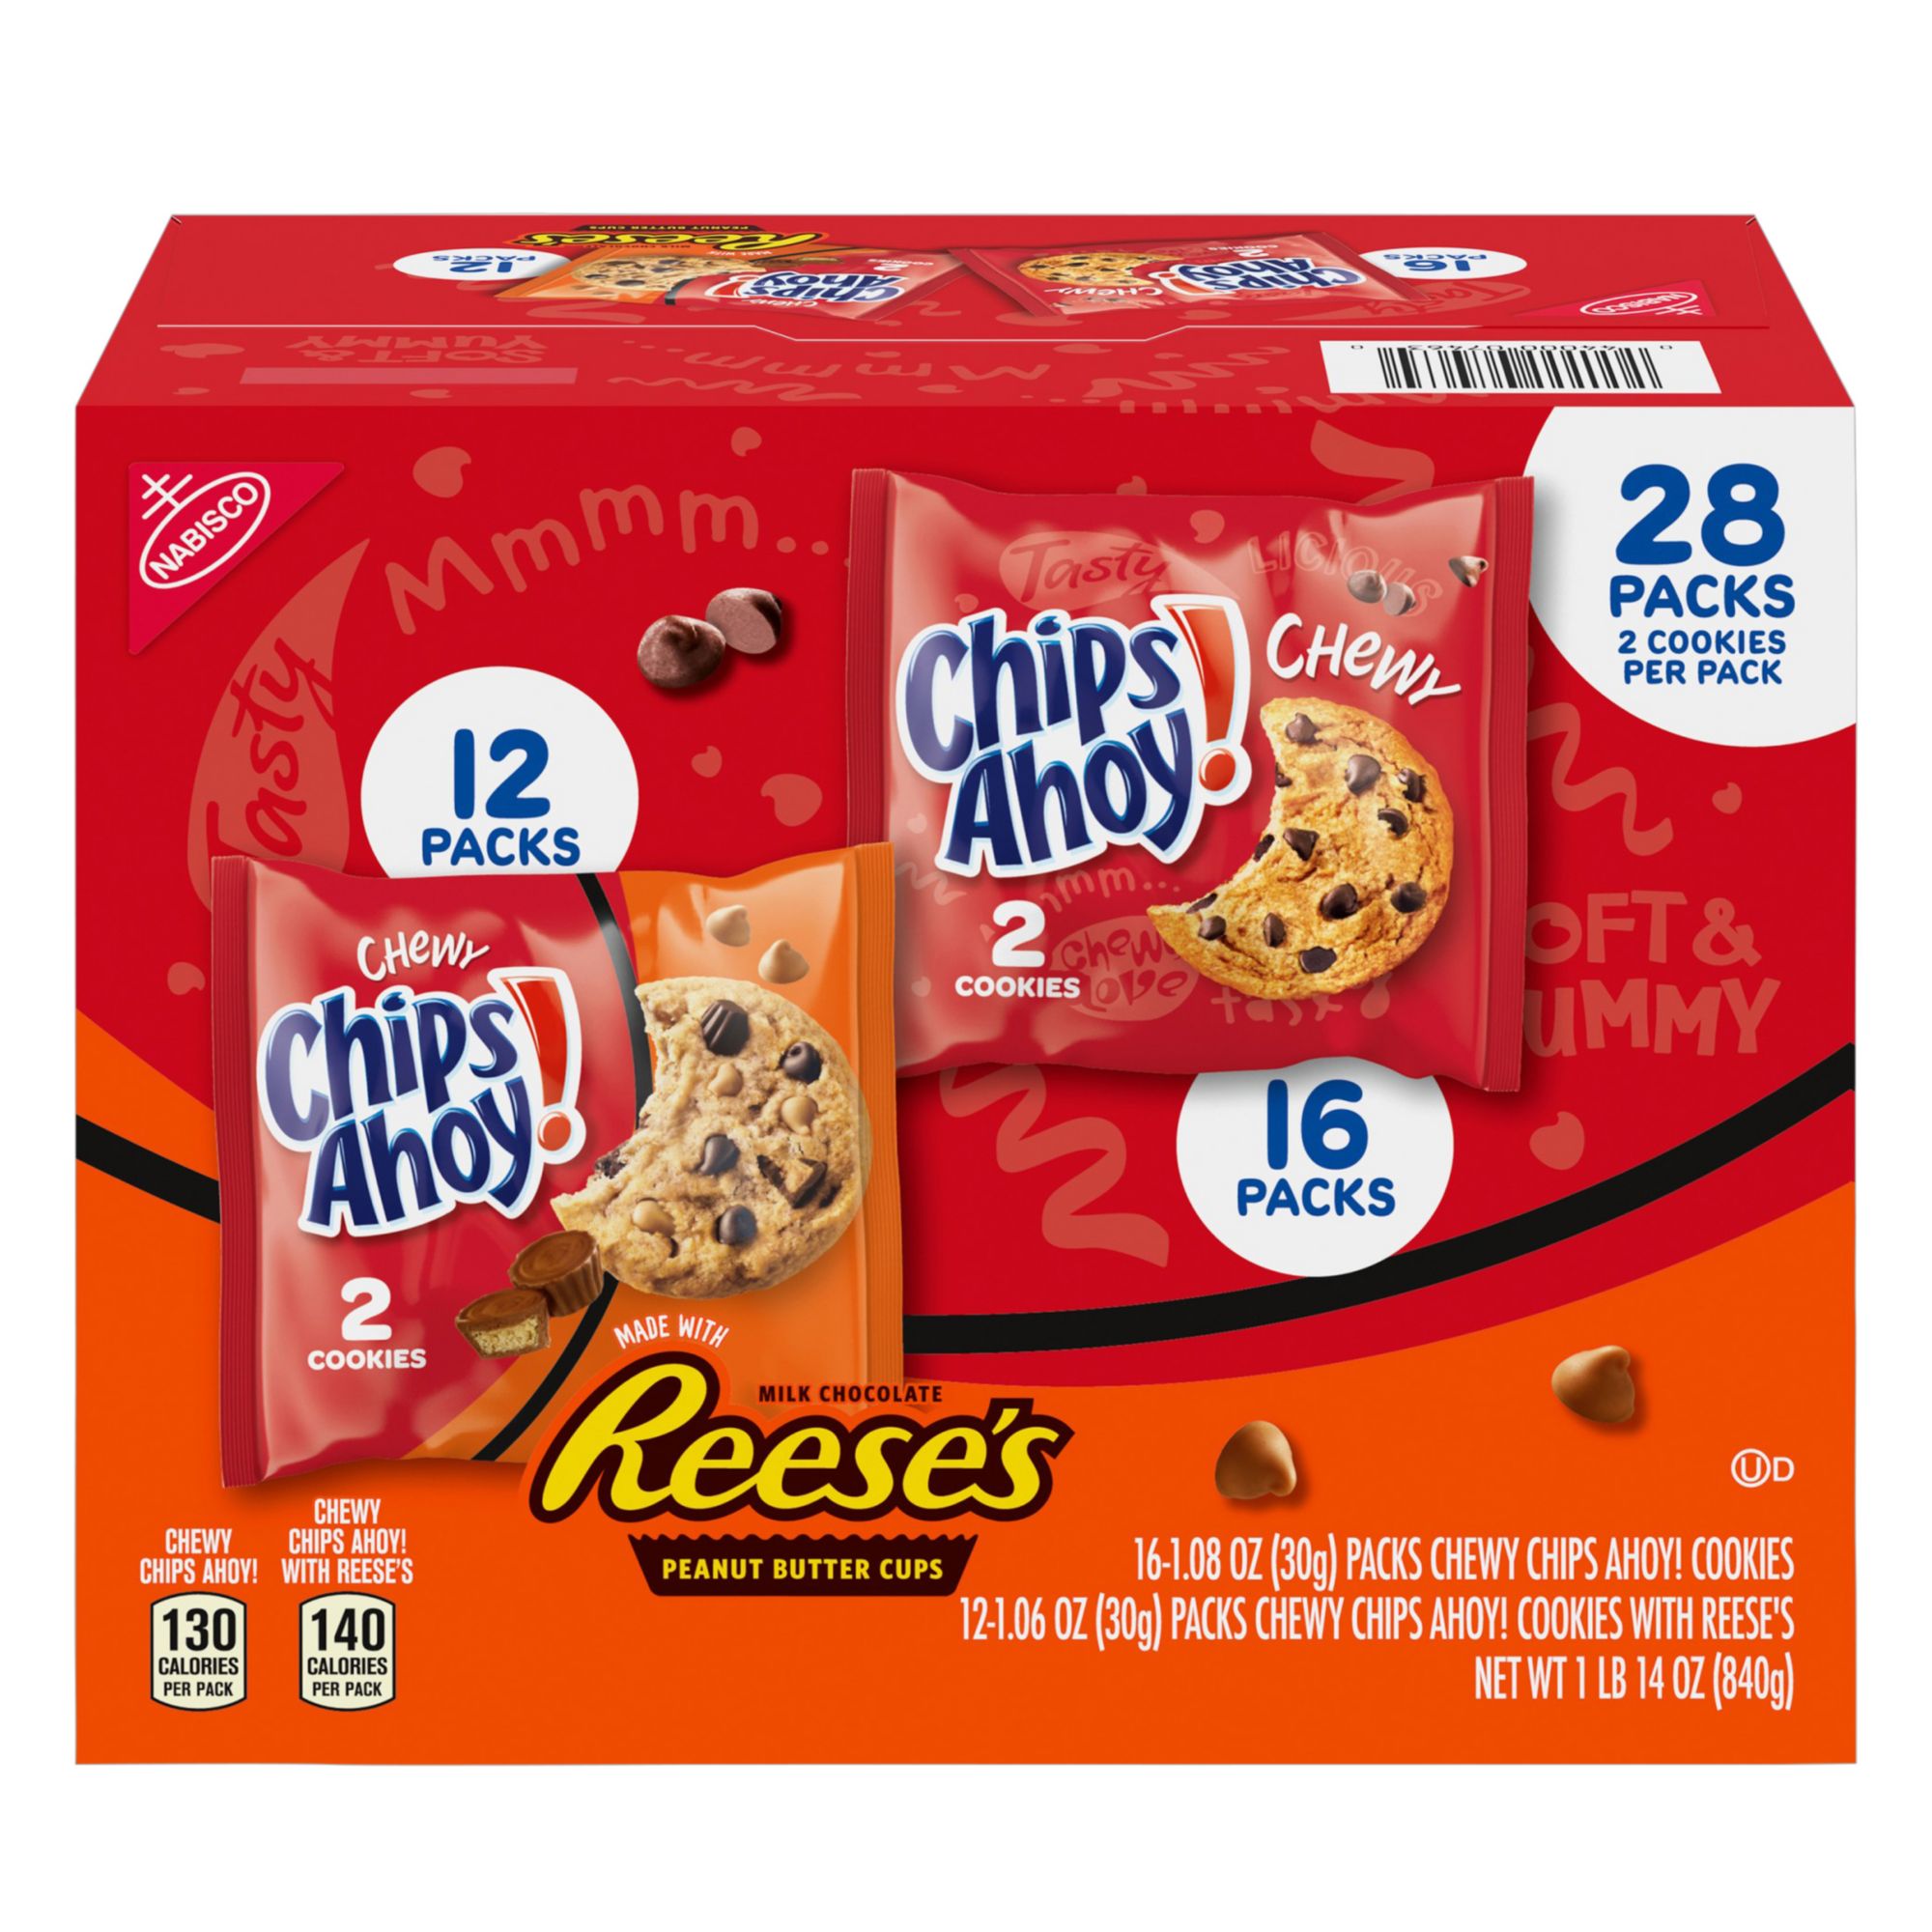 Chips Ahoy Chewy & Reese's Chocolate Chip Cookies Variety Pack, 28 pk.